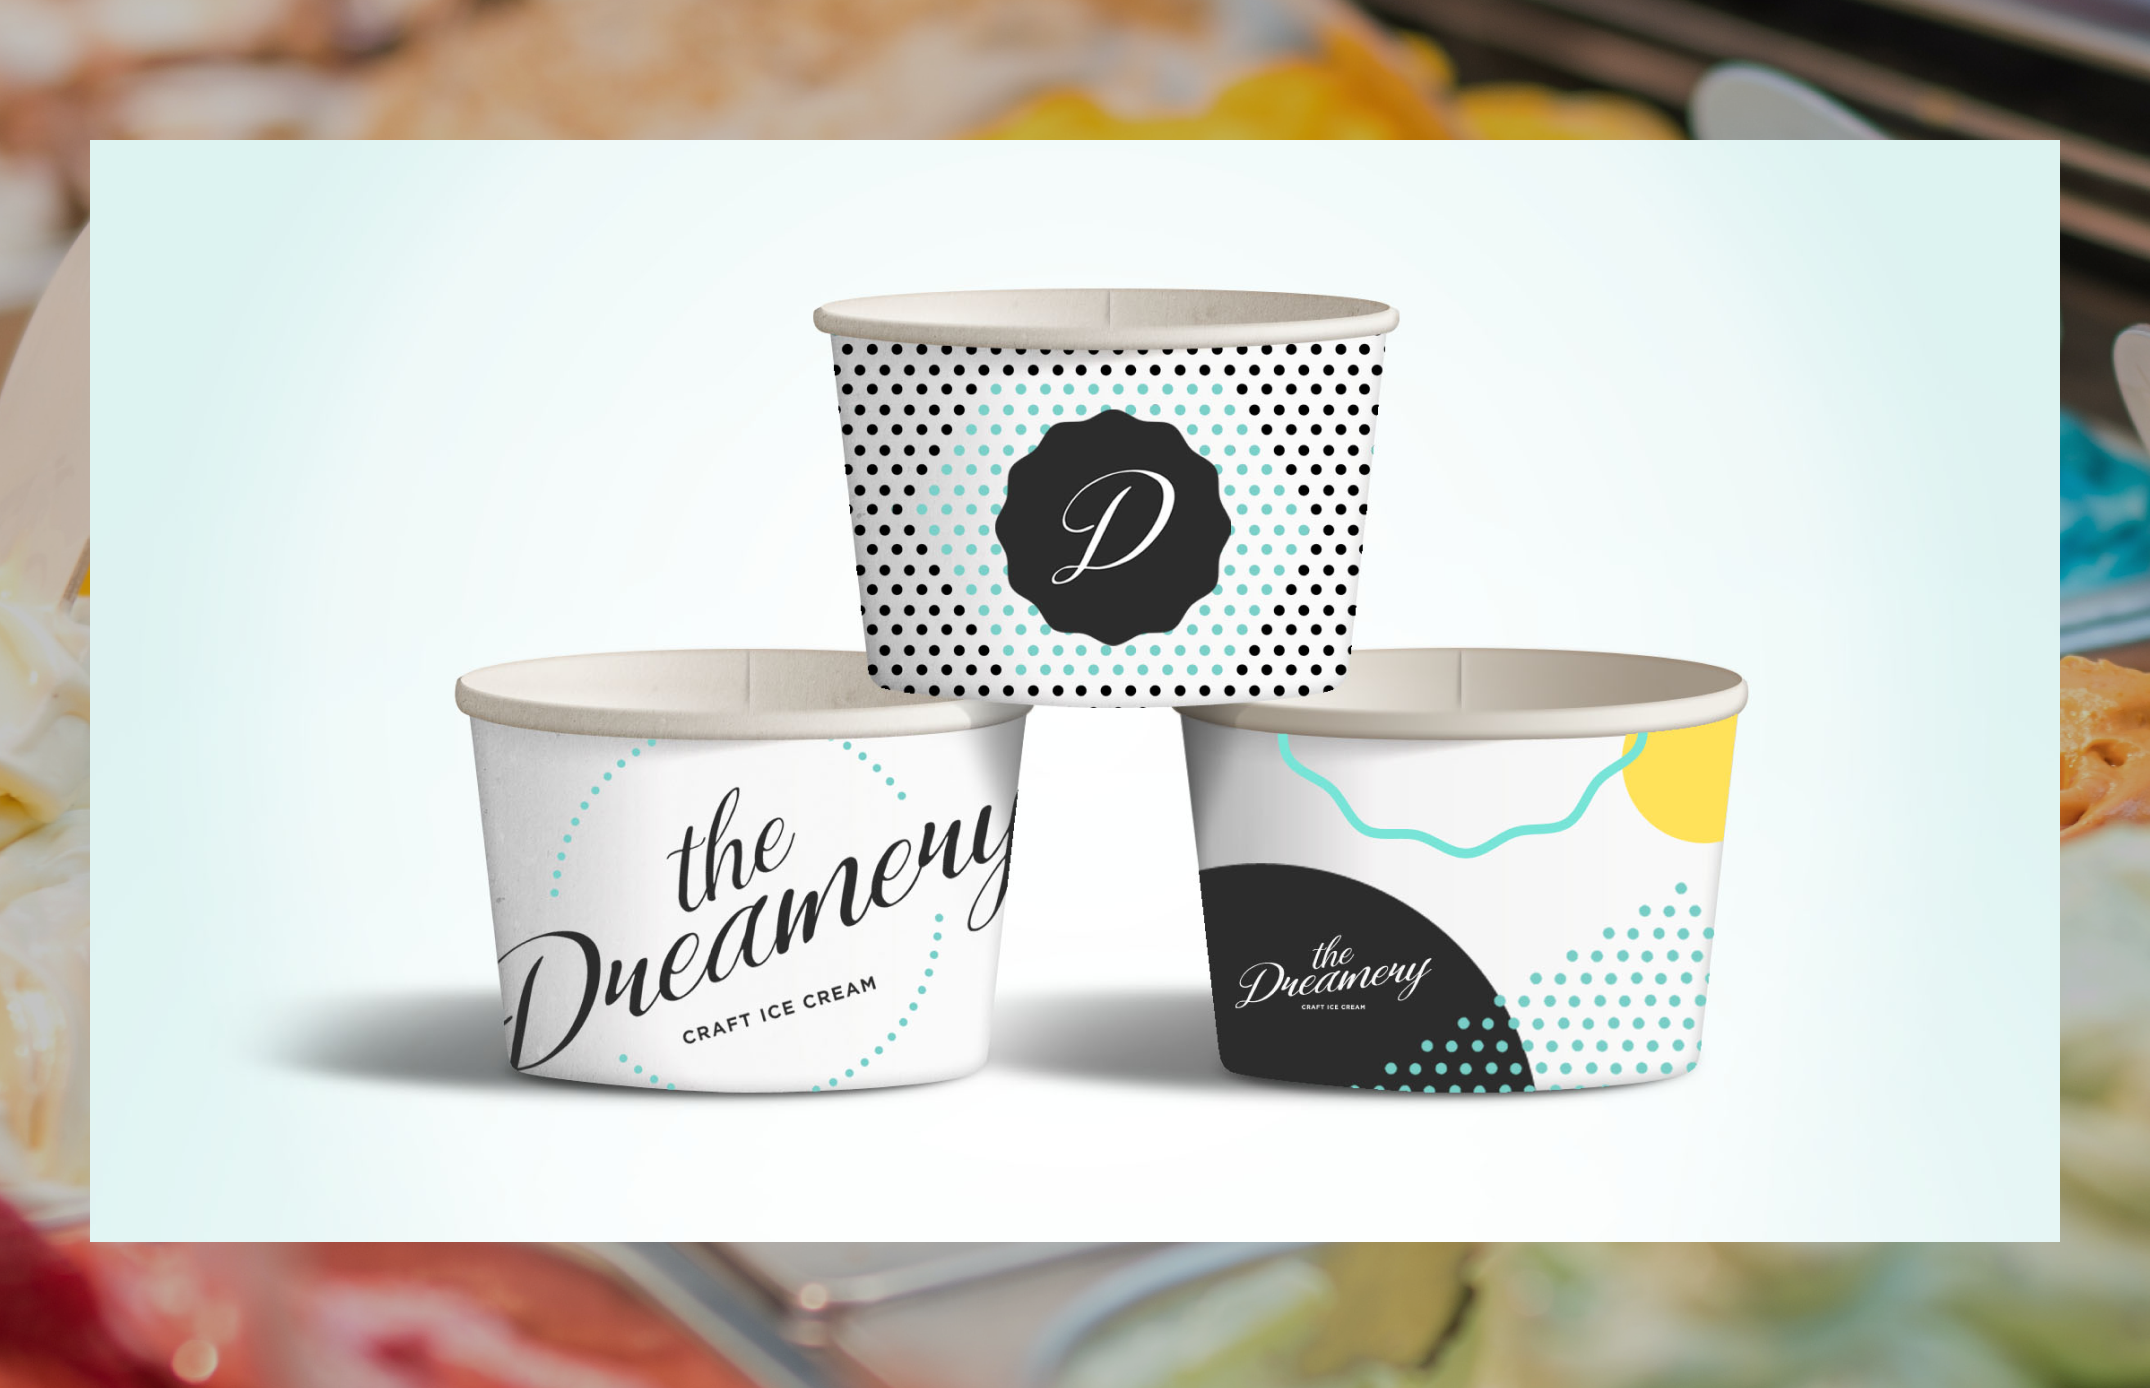 The Dreamery paper ice cream containers